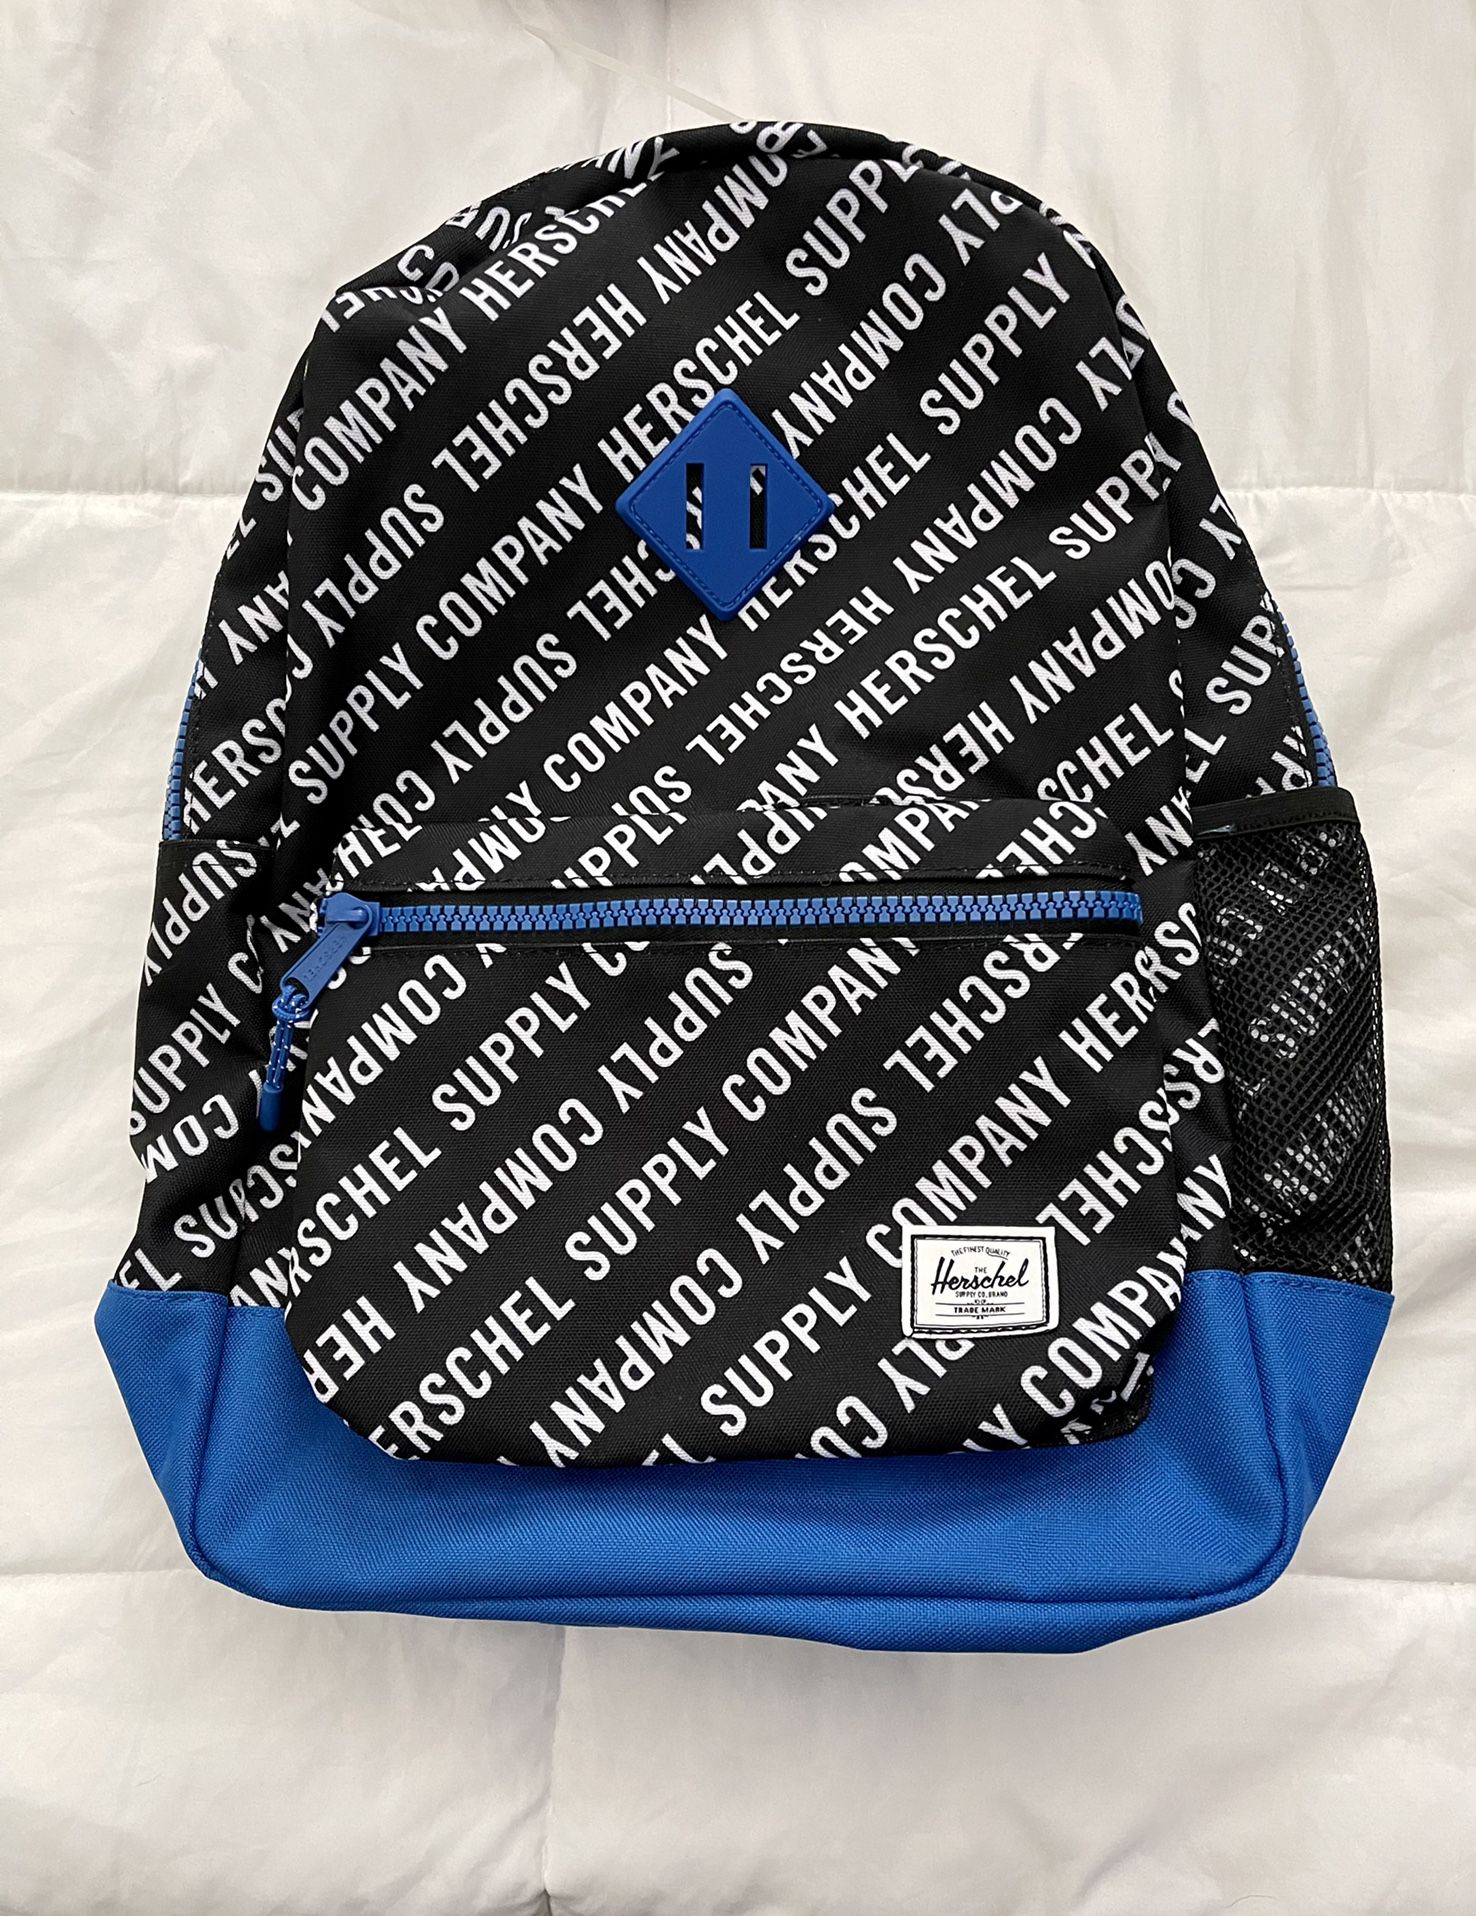 HERSCHEL HERITAGE YOUTH X-LARGE BACKPACK- Roll Call Black/White/Lapis Blue